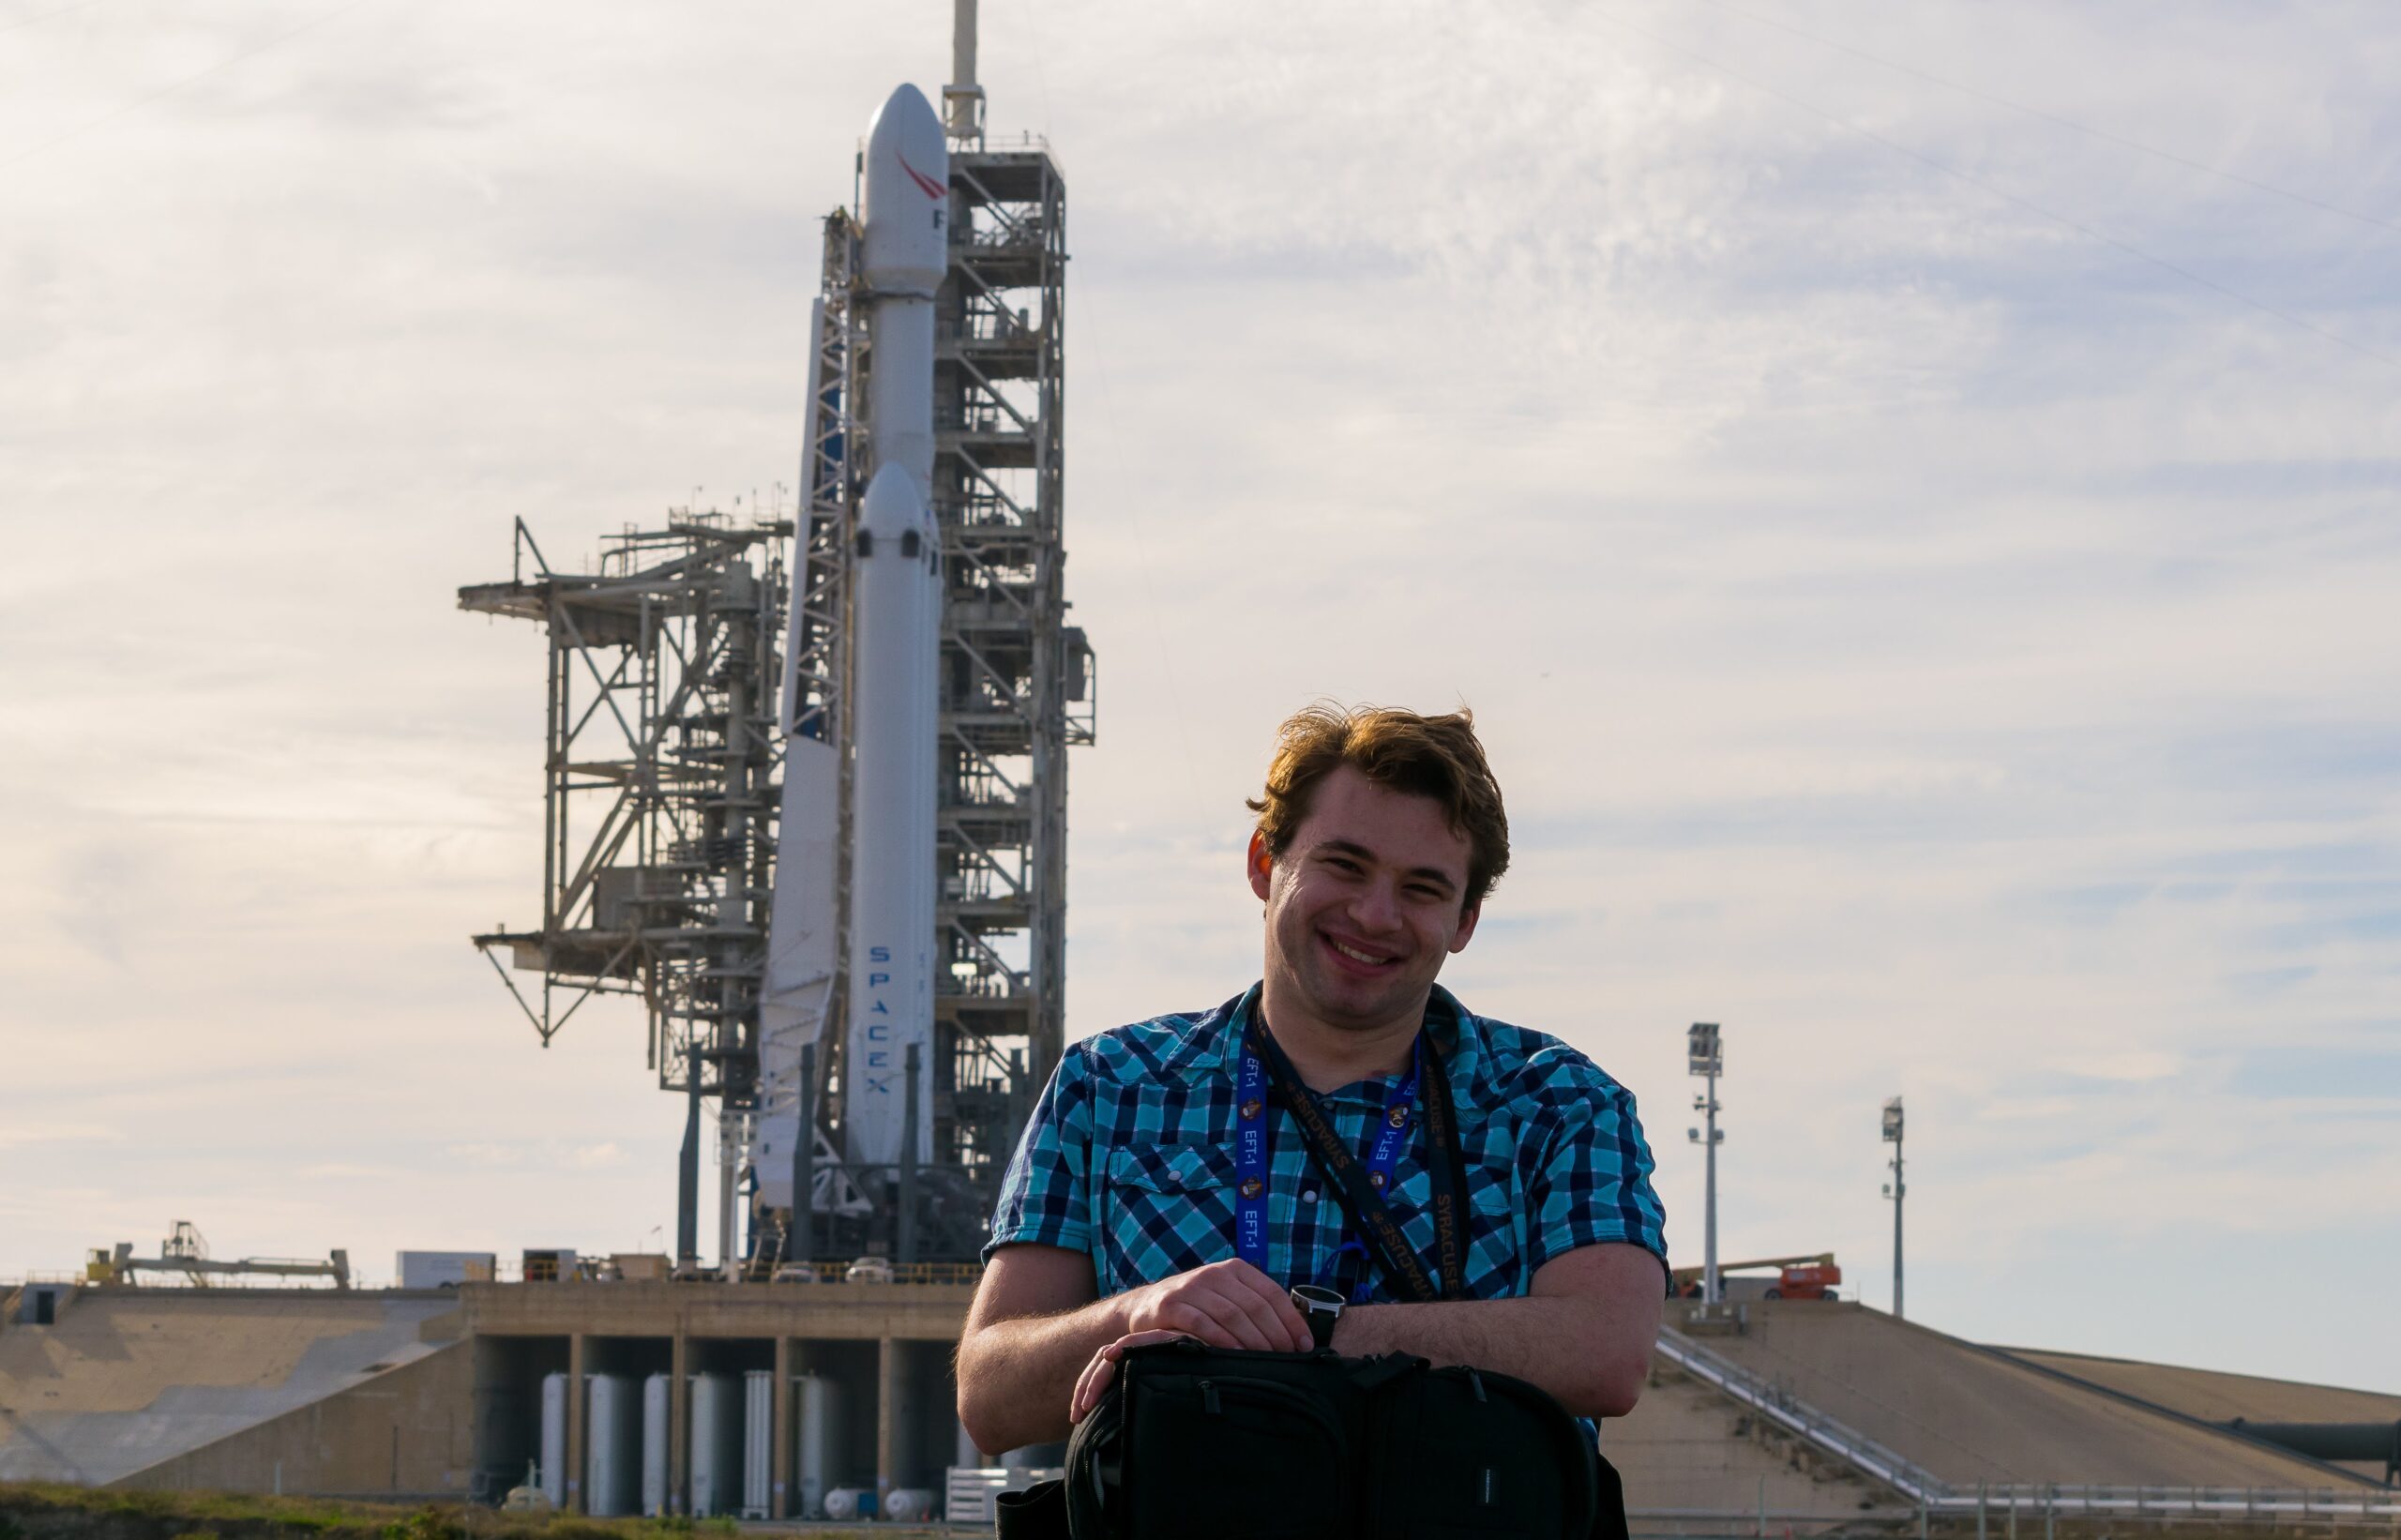 A photo of Sawyer Rosenstein positioned off-center slightly to the right smiling at the camera with his hands on top of a bag. On left behind him there is a SpaceX rocket.